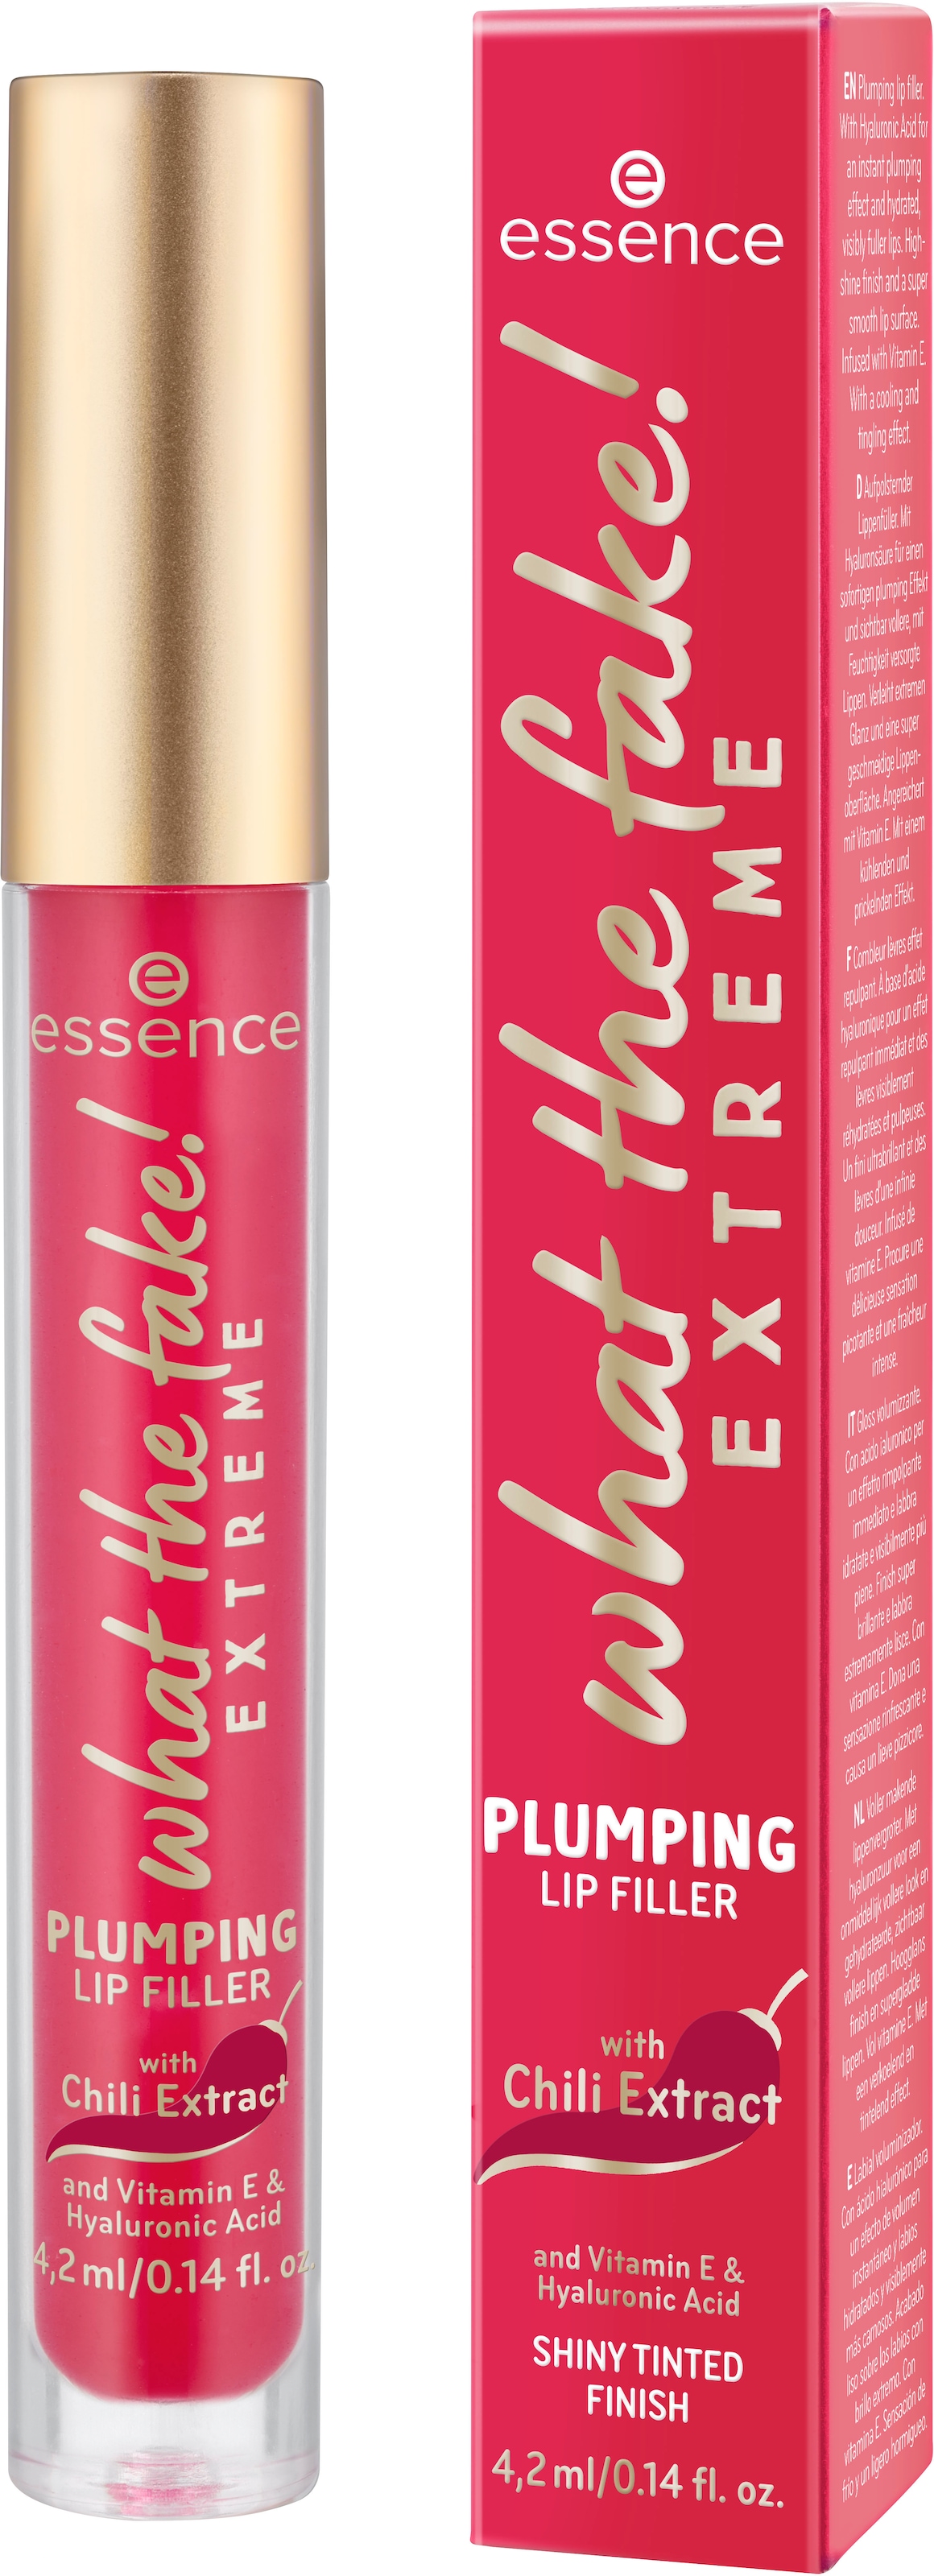 (Set, tlg.) Essence bei LIP OTTO »what PLUMPING FILLER«, EXTREME fake! 3 the Lip-Booster